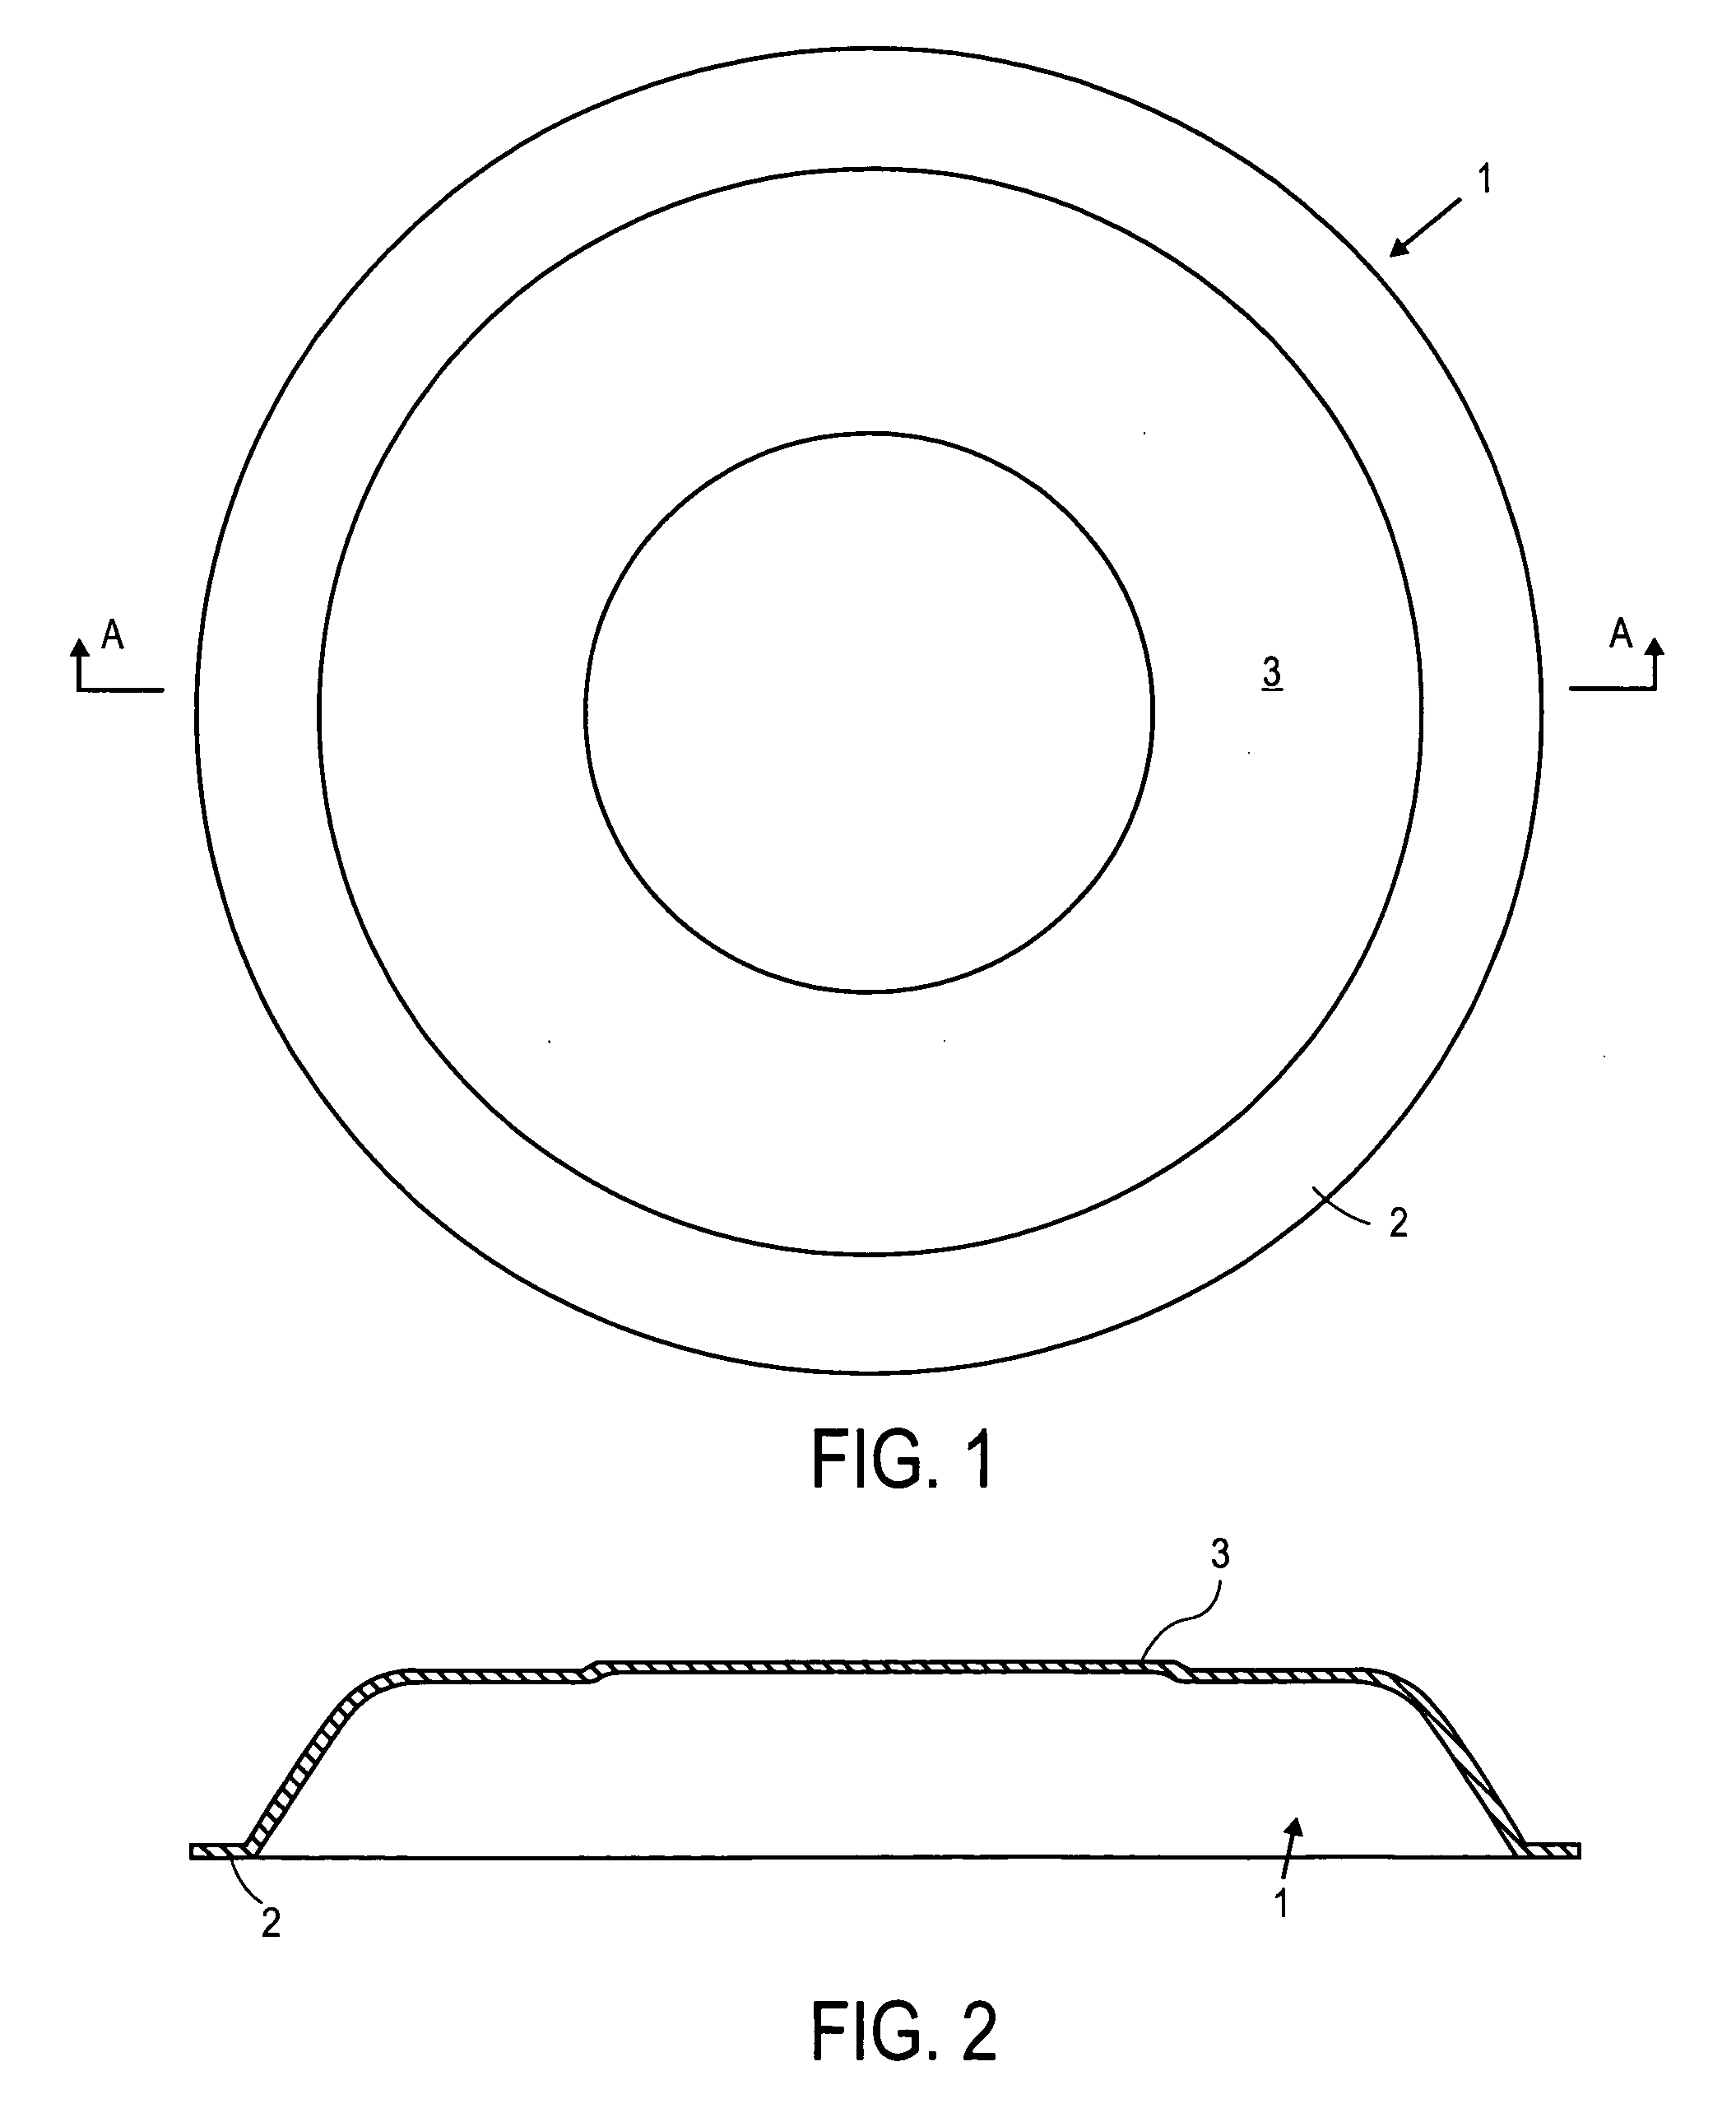 Method and apparatus for cooking a pizza